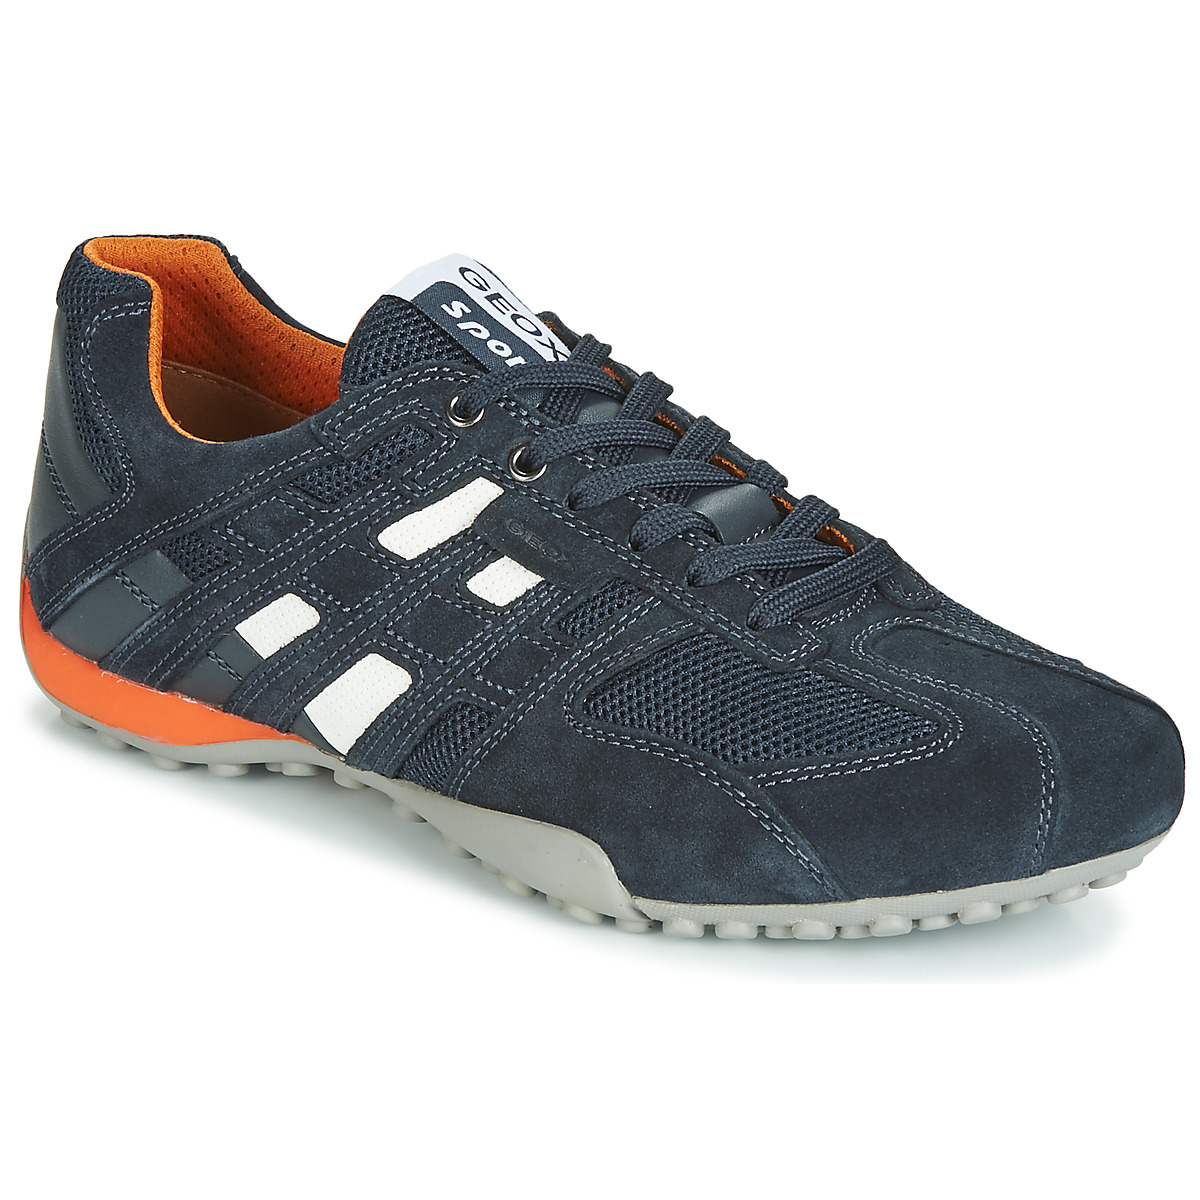 Geox UOMO SNAKE Marine - Free delivery Spartoo ! - Shoes Low top trainers Men USD/$119.50